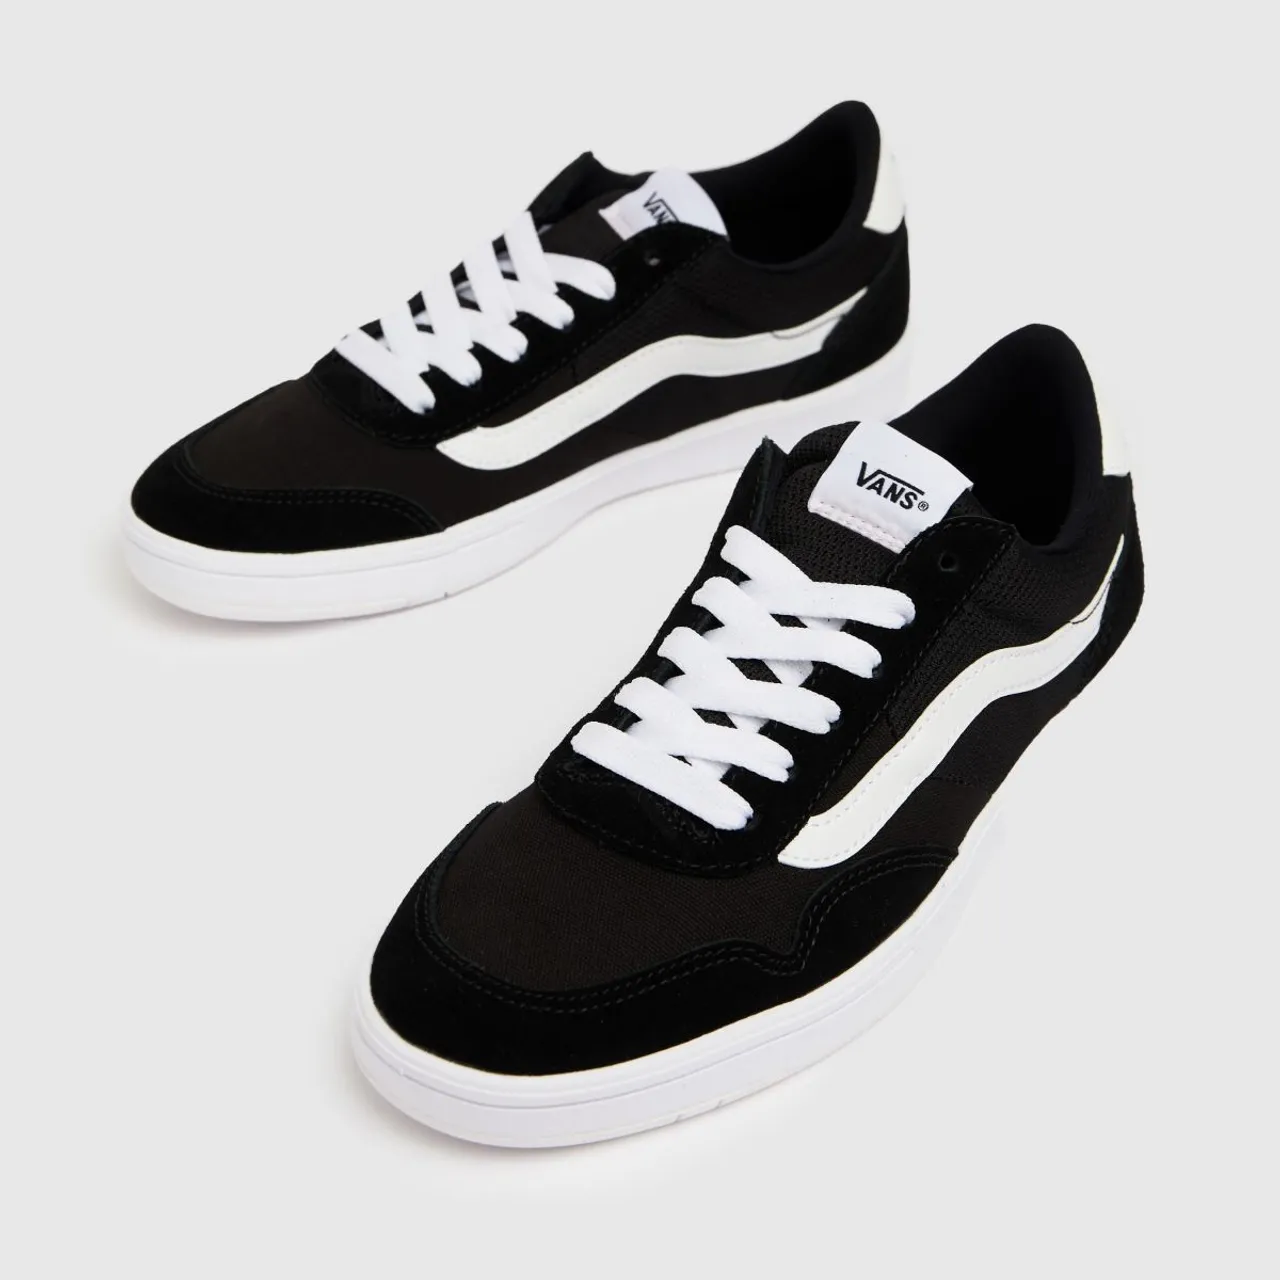 Vans Cruze To Cc Trainers In Black & White